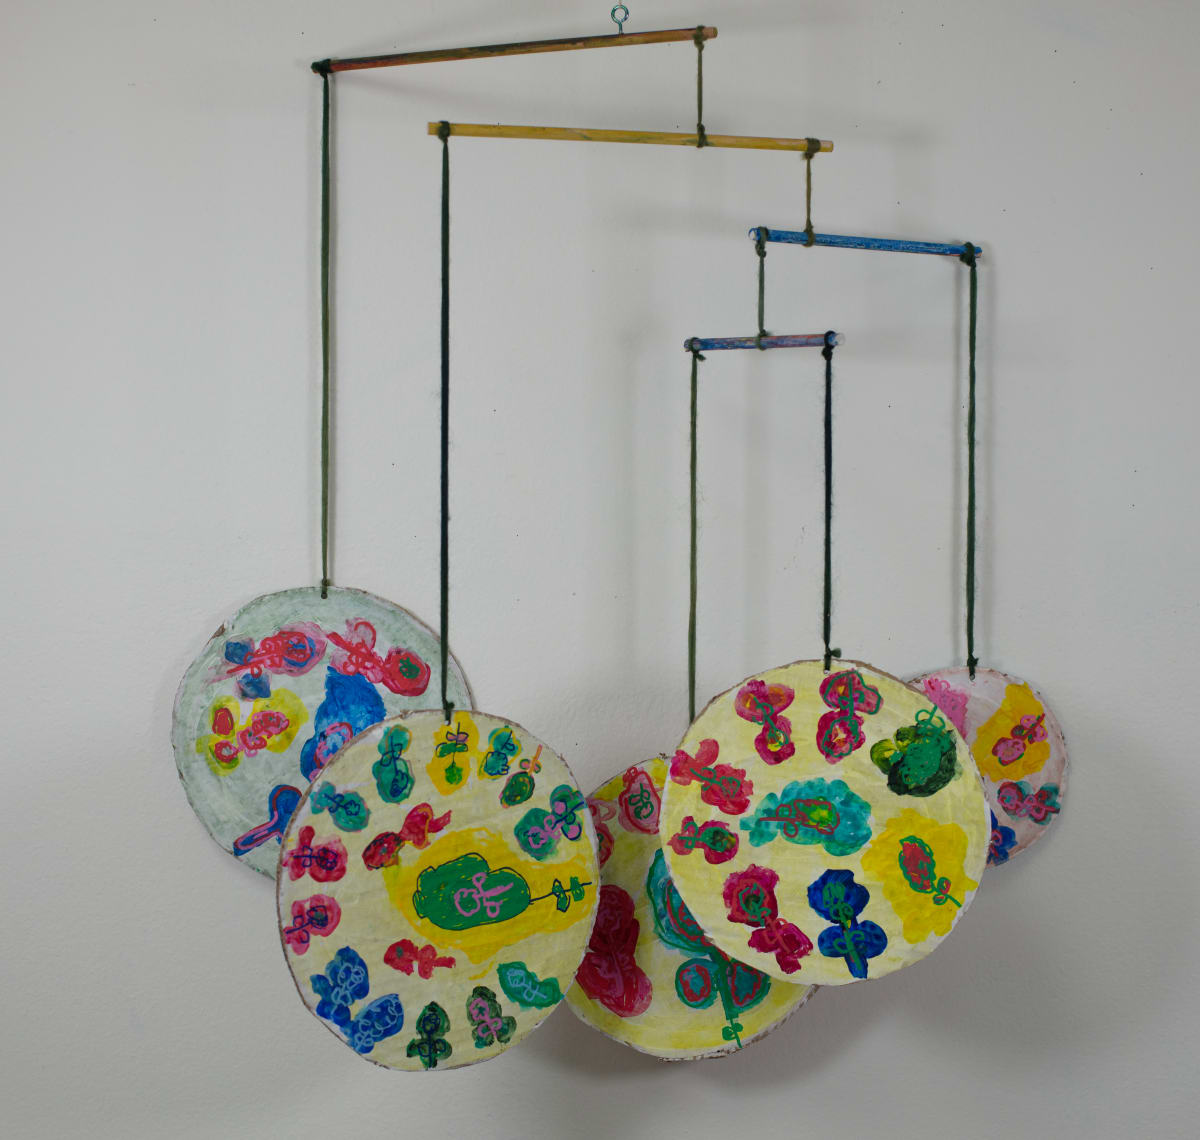 Painted Flower Mobile by Cathy  Pitzak  Image: two-sided paintings of flowers